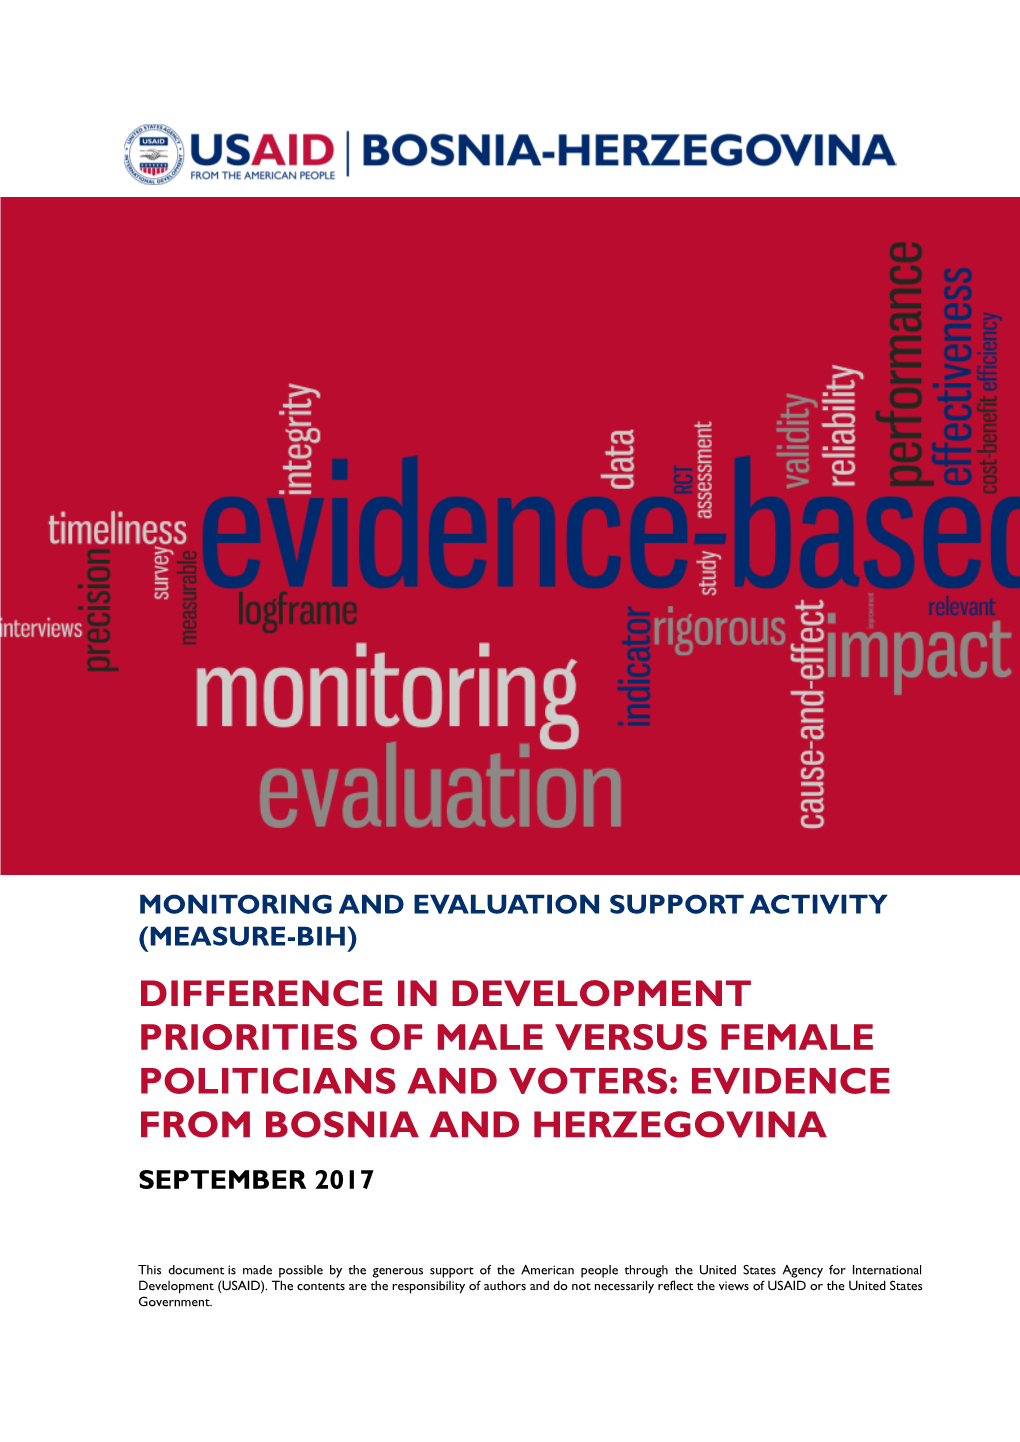 Difference in Development Priorities of Male Versus Female Politicians and Voters: Evidence from Bosnia and Herzegovina September 2017